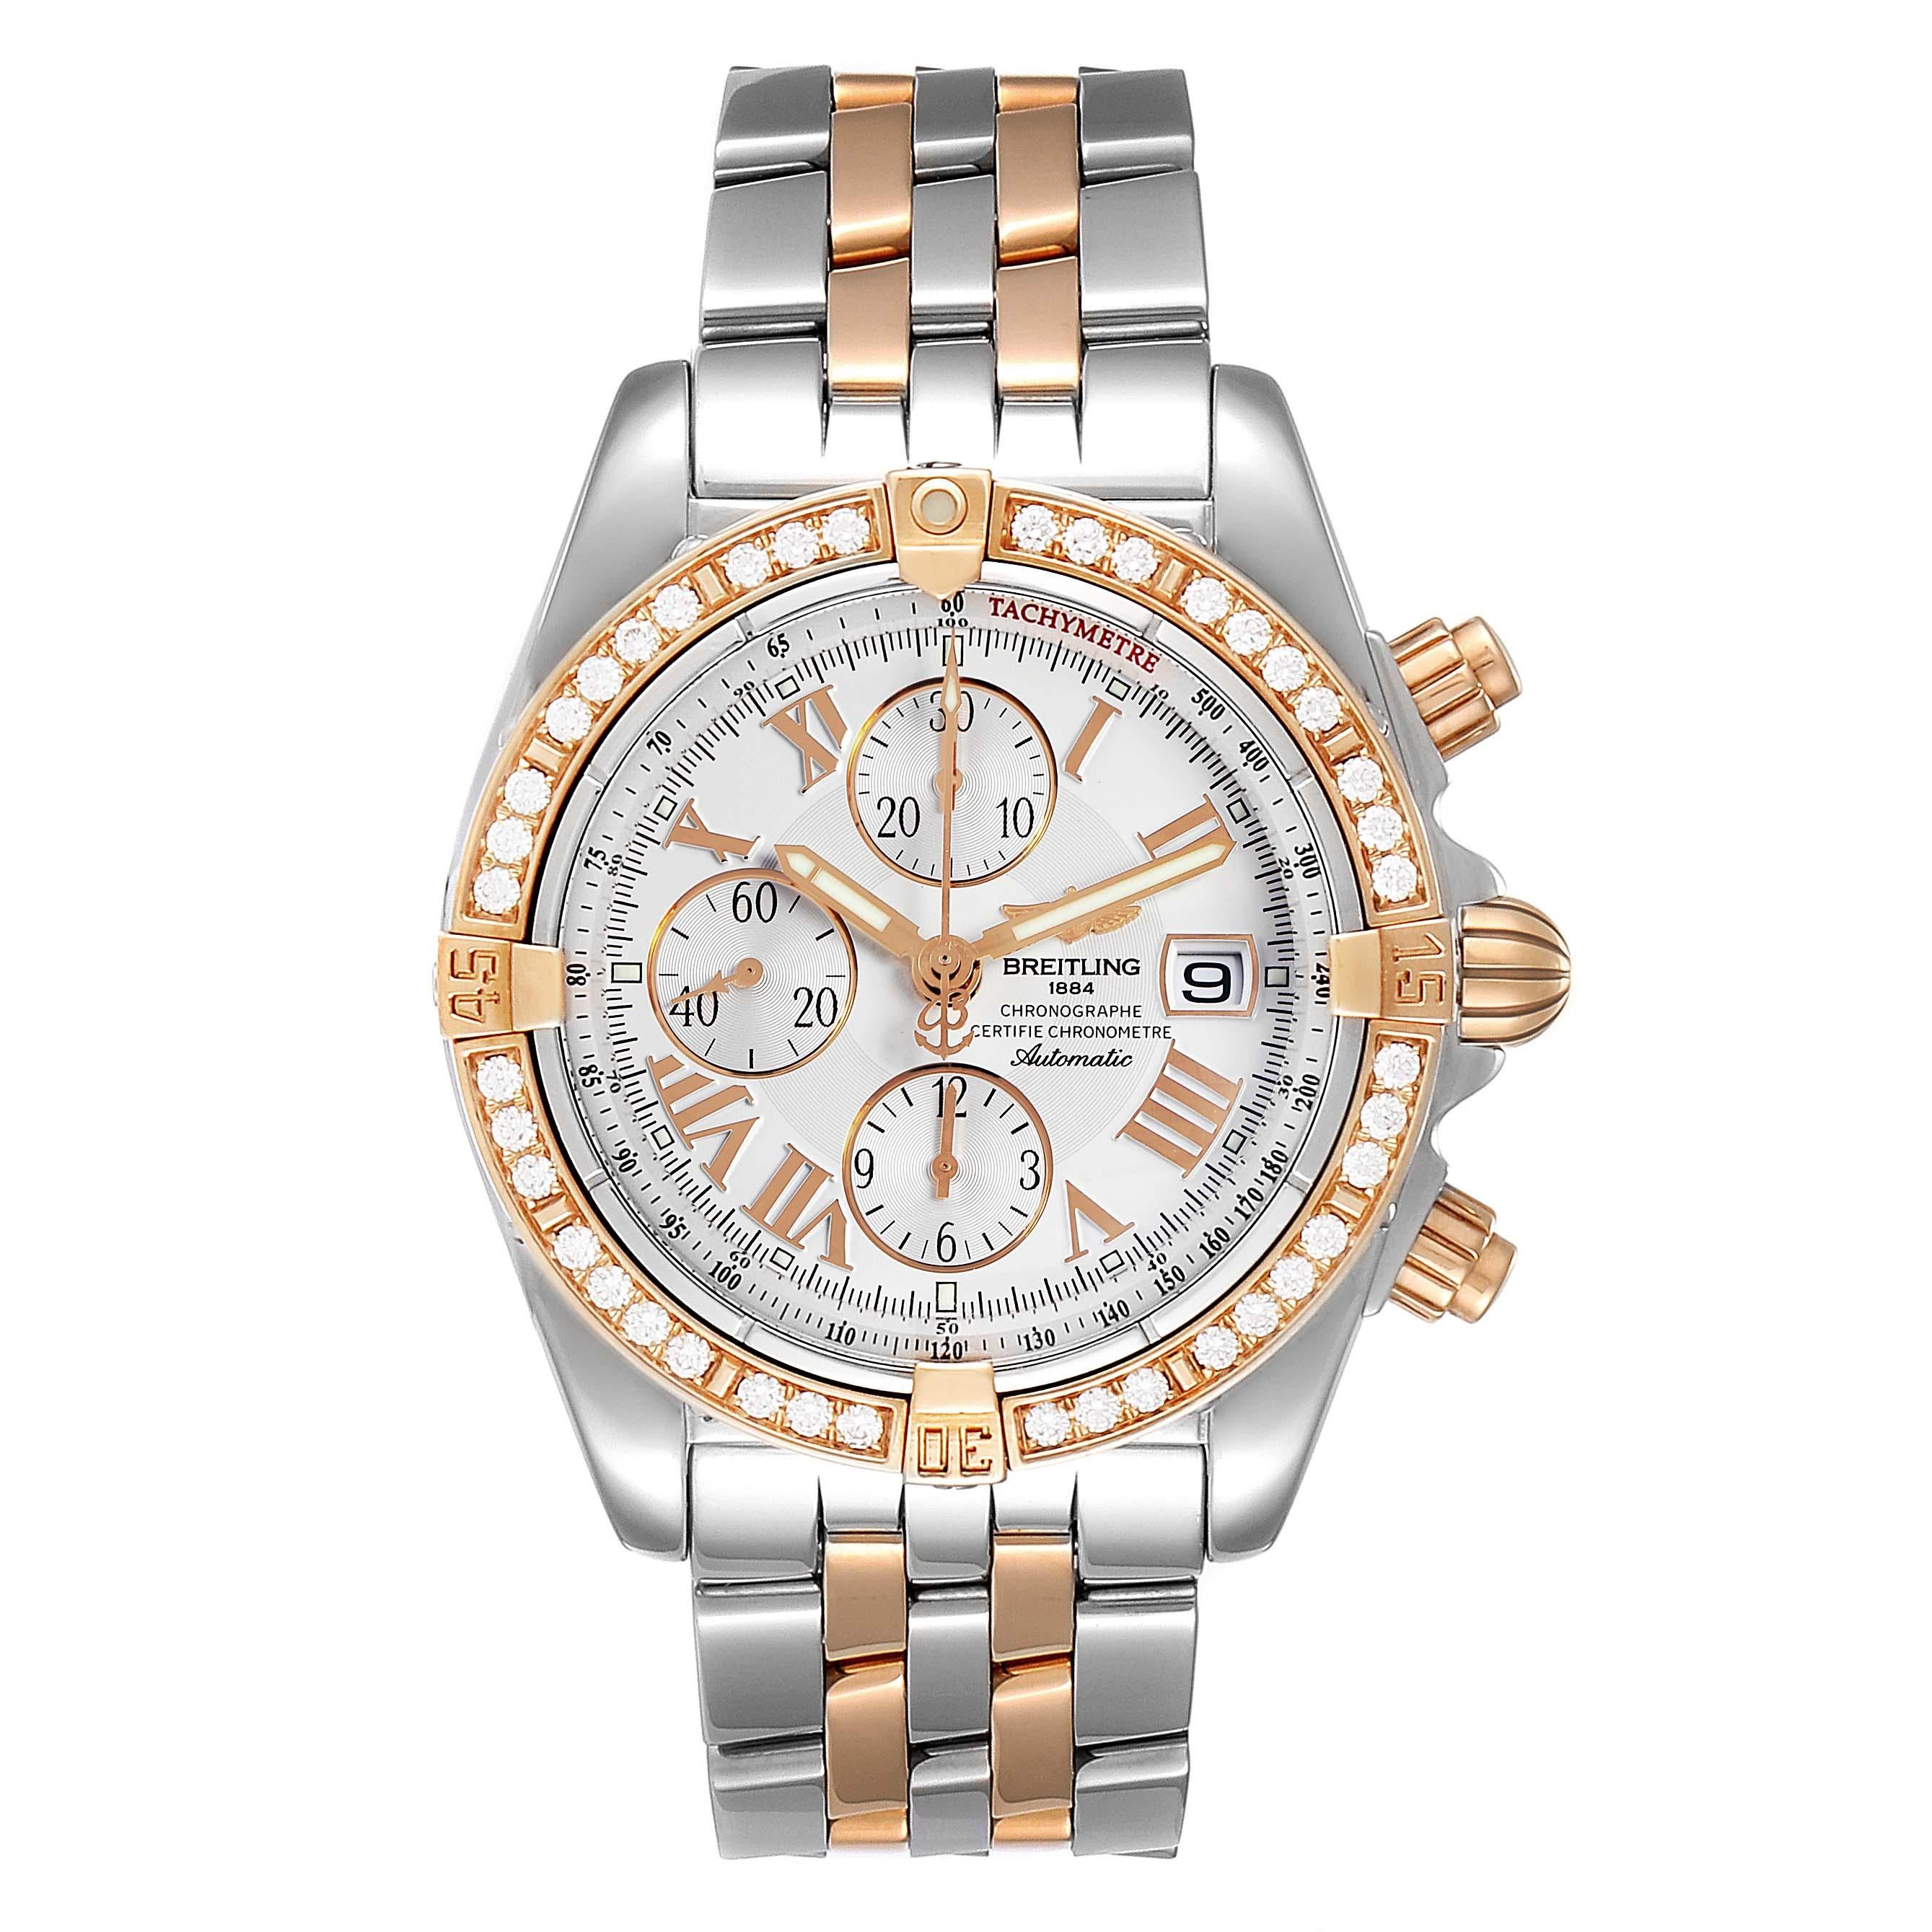 Breitling Chronomat Evolution Steel Rose Gold Diamond Watch C13356. Automatic self-winding officially certified chronometer movement. Chronograph function. Stainless steel round case 41.5 mm in diameter. Transparent case back. The movement's